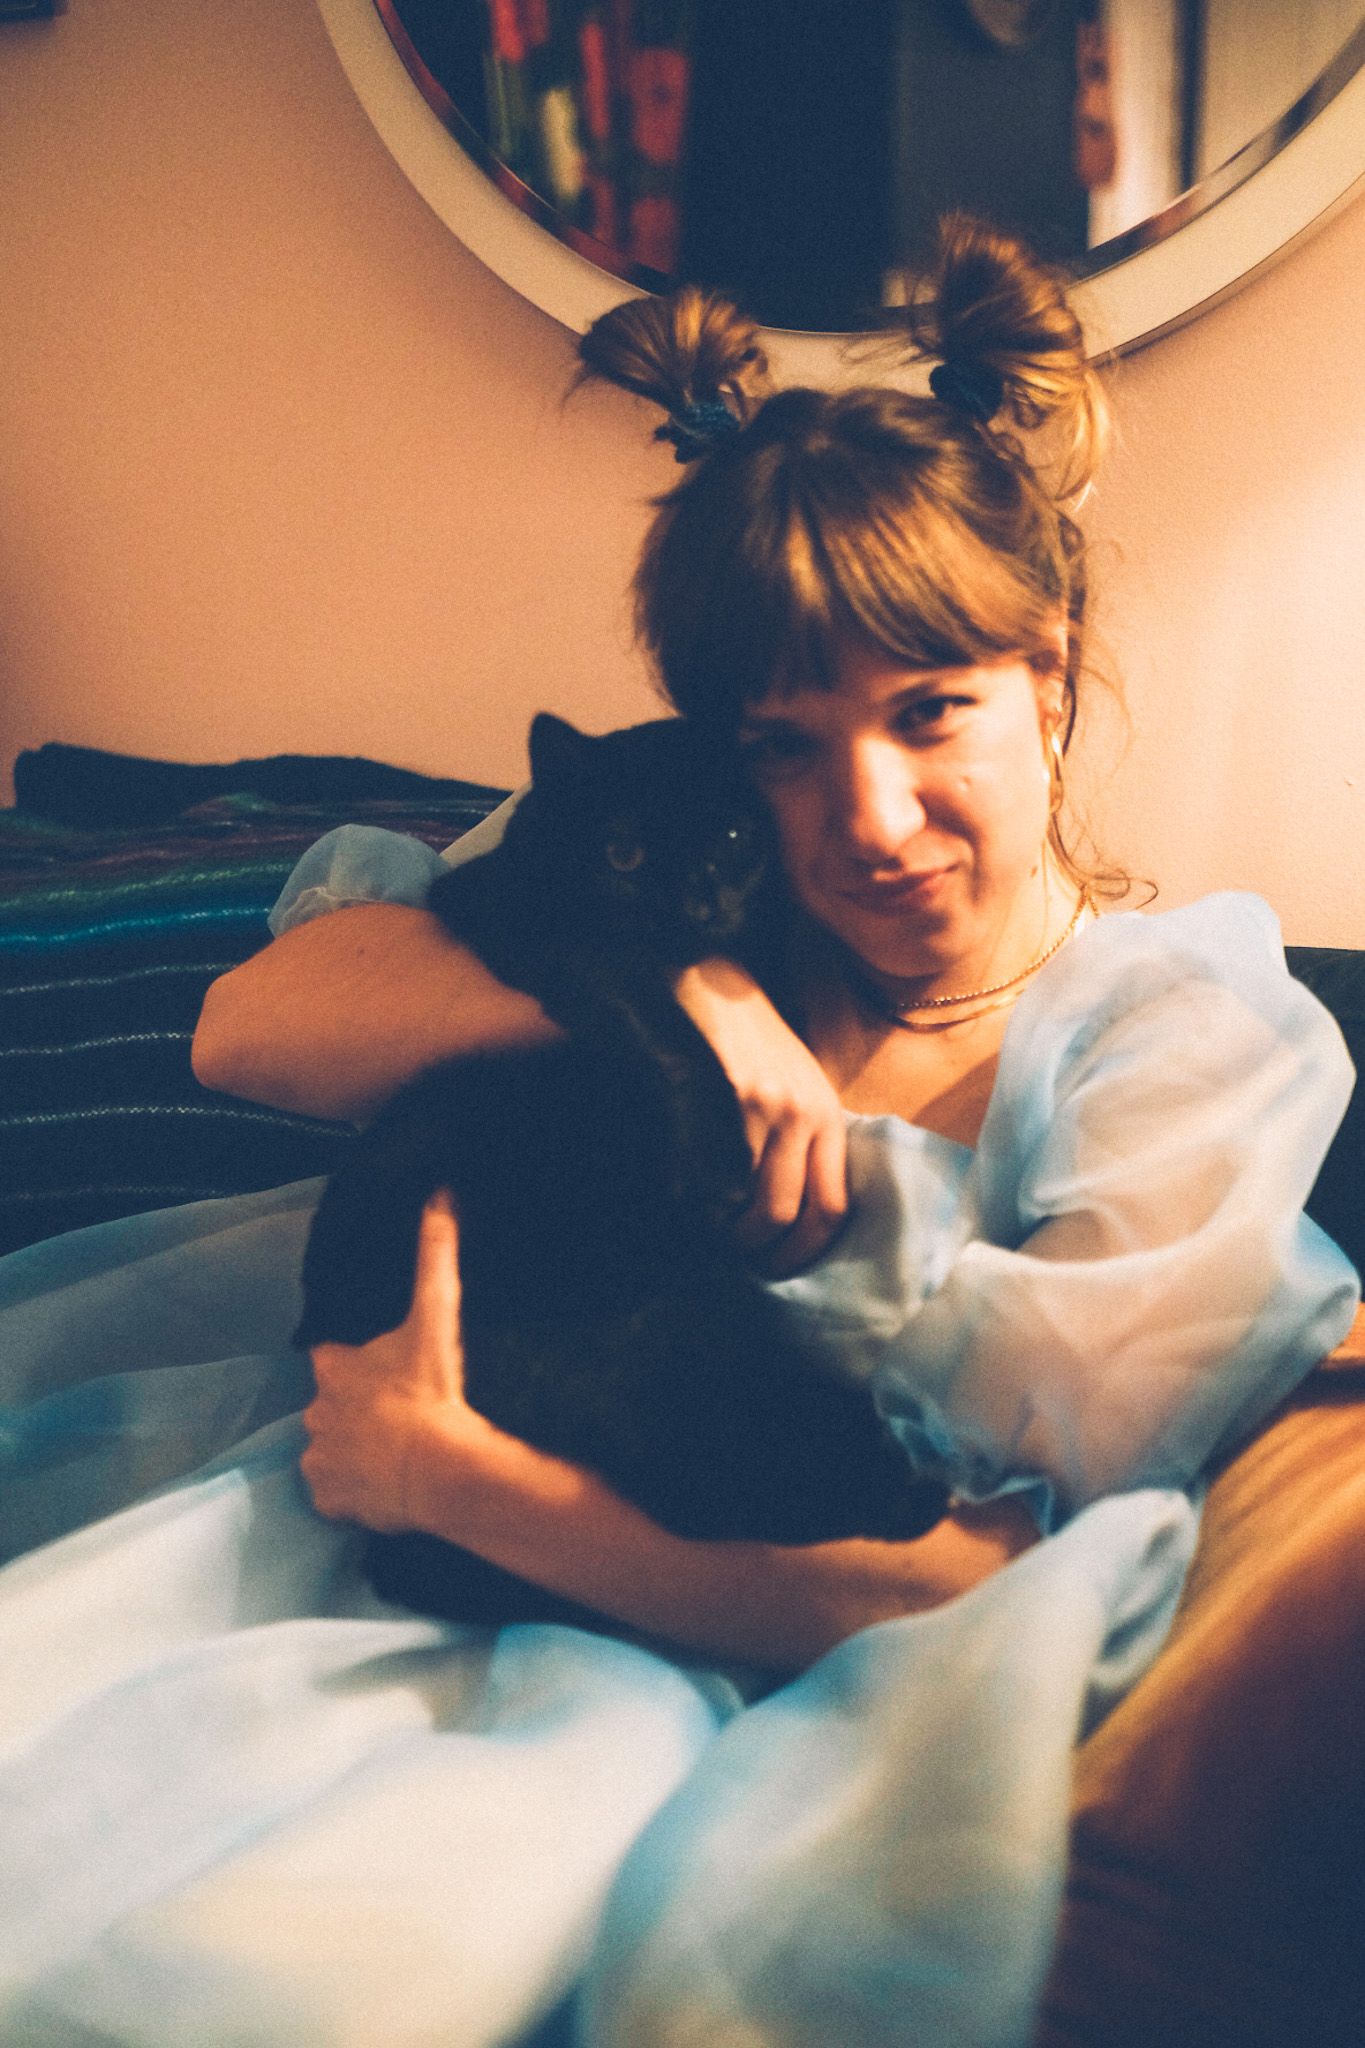 A woman with pigtails in a puffy blue dress sits on a couch, holding a black cat.